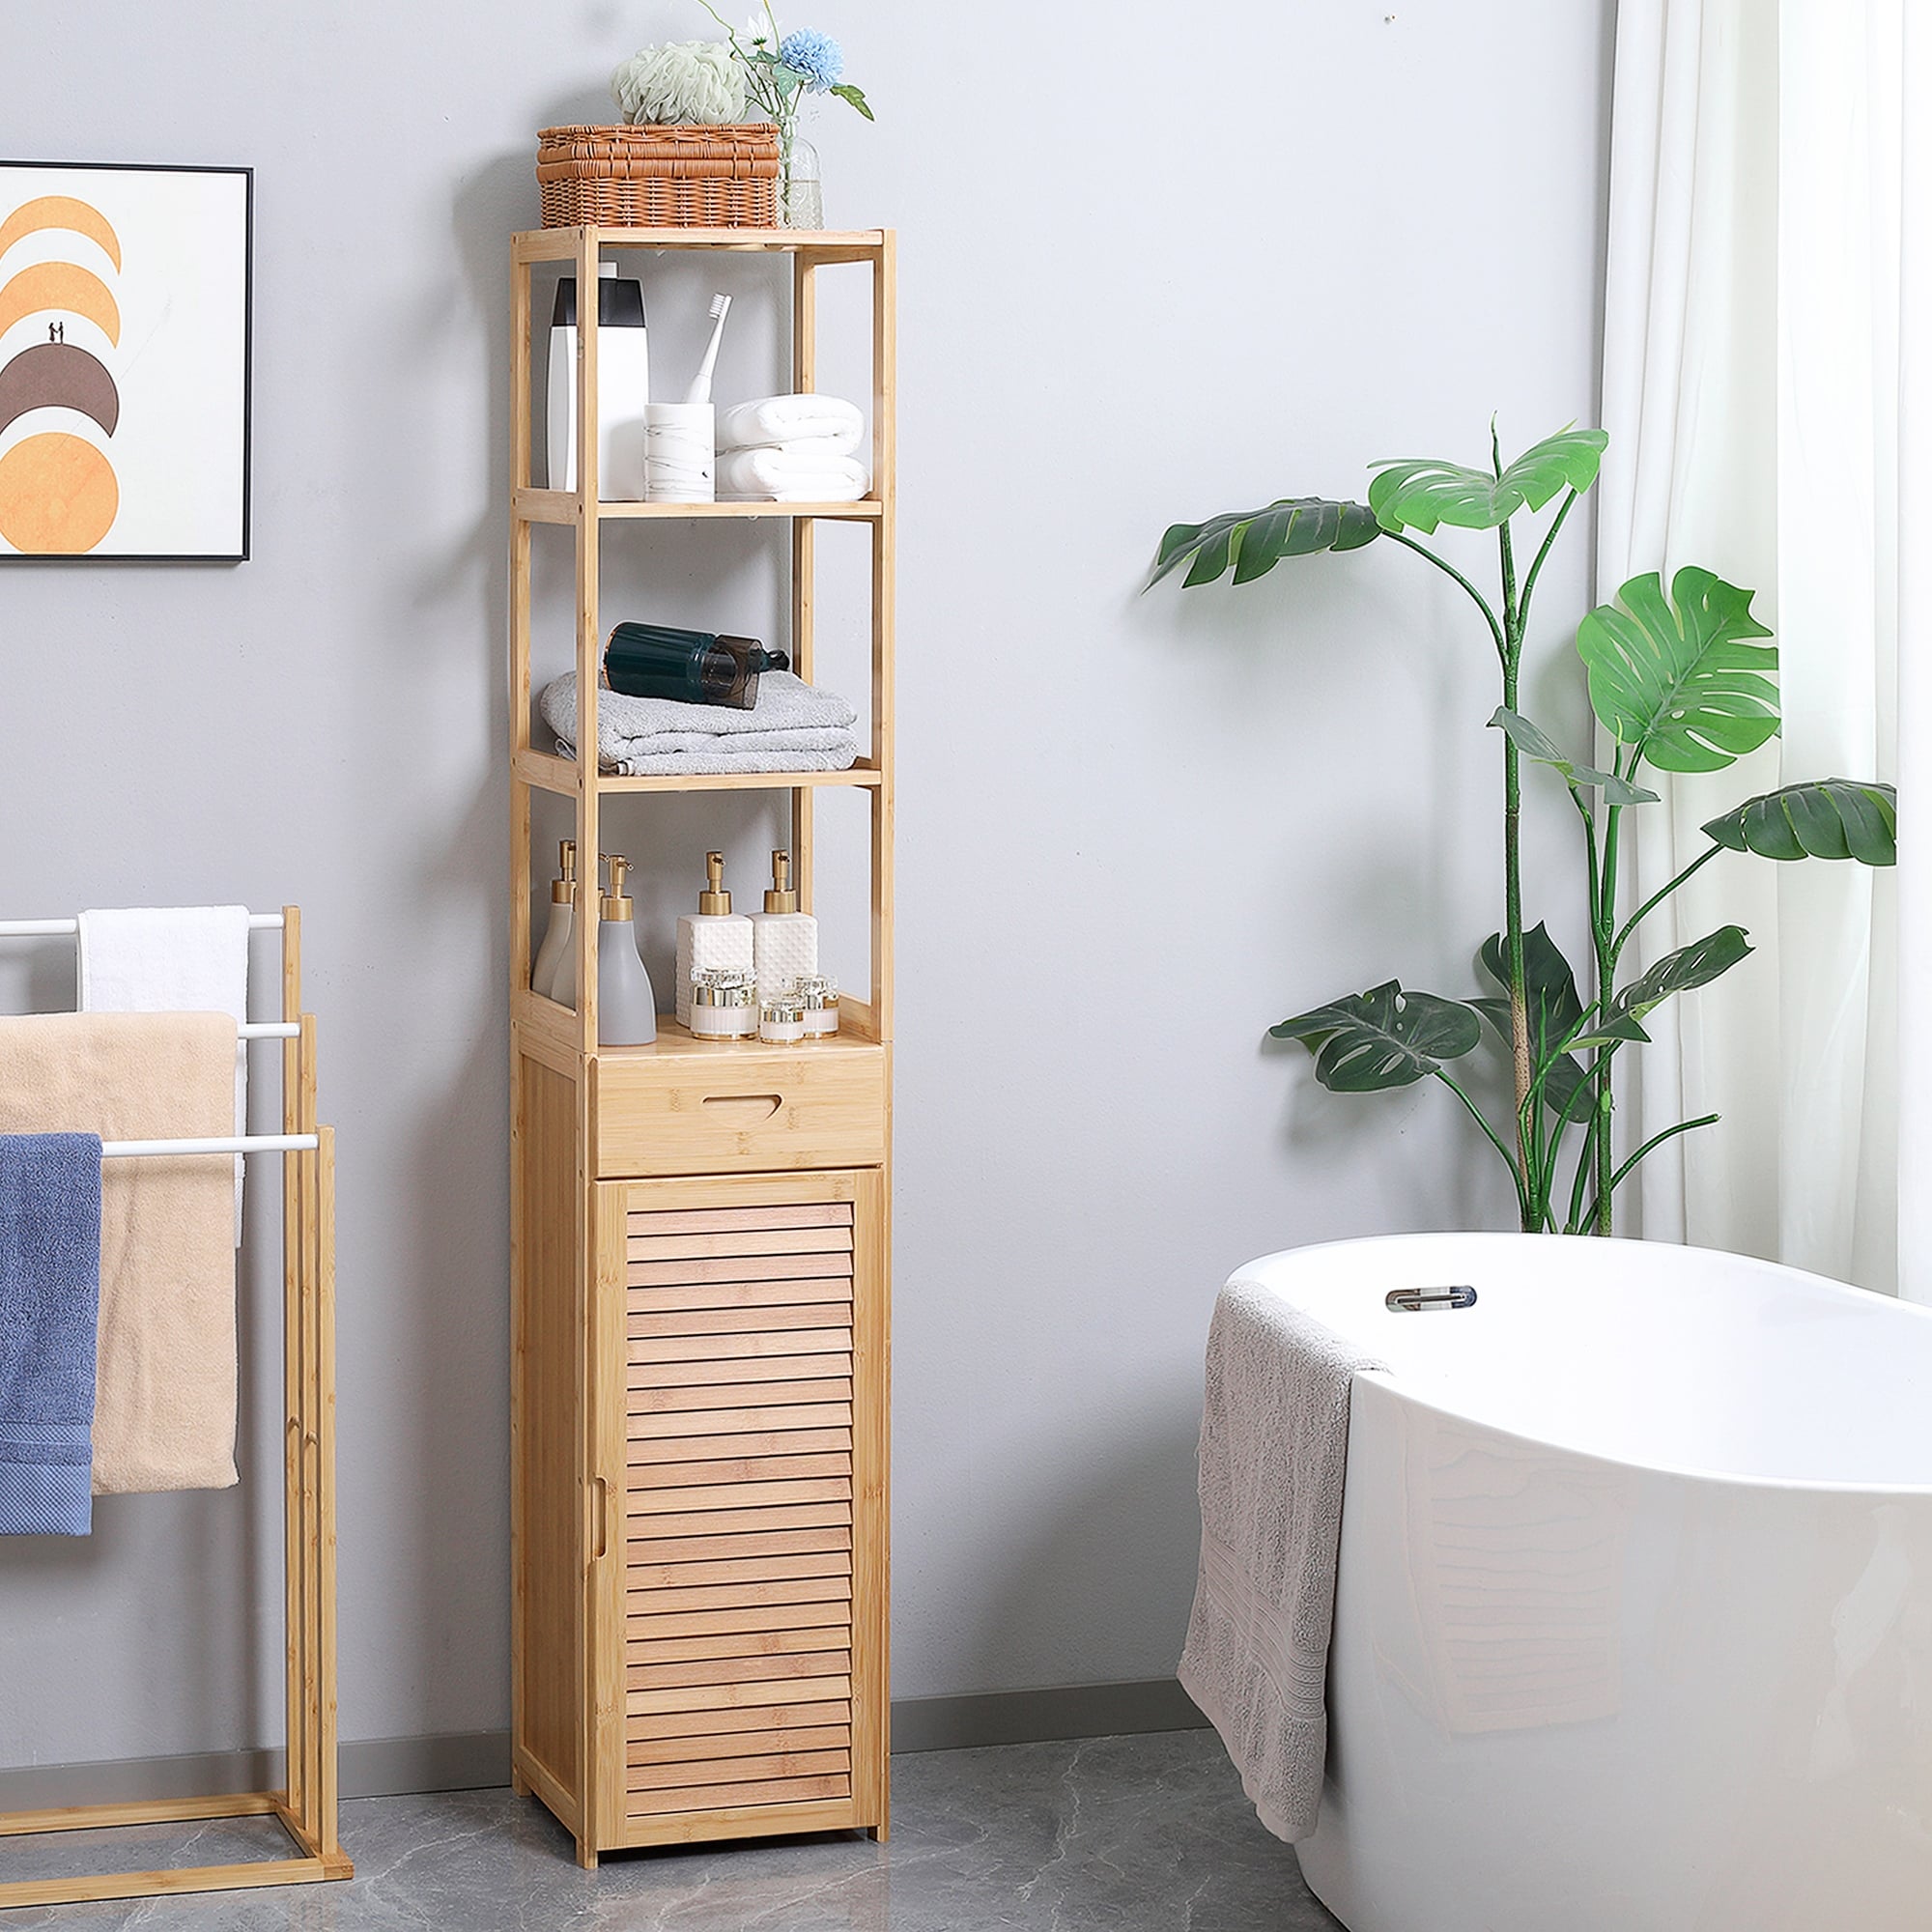 https://ak1.ostkcdn.com/images/products/is/images/direct/a7fdce6fa5ed0cf1983048d327a4effa8806650f/kleankin-Tall-Bathroom-Cabinet-with-Drawer-and-Slatted-Shelves%2C-Tall-Slim-Bamboo-Linen-Tower-Freestanding-Linen-Towel.jpg